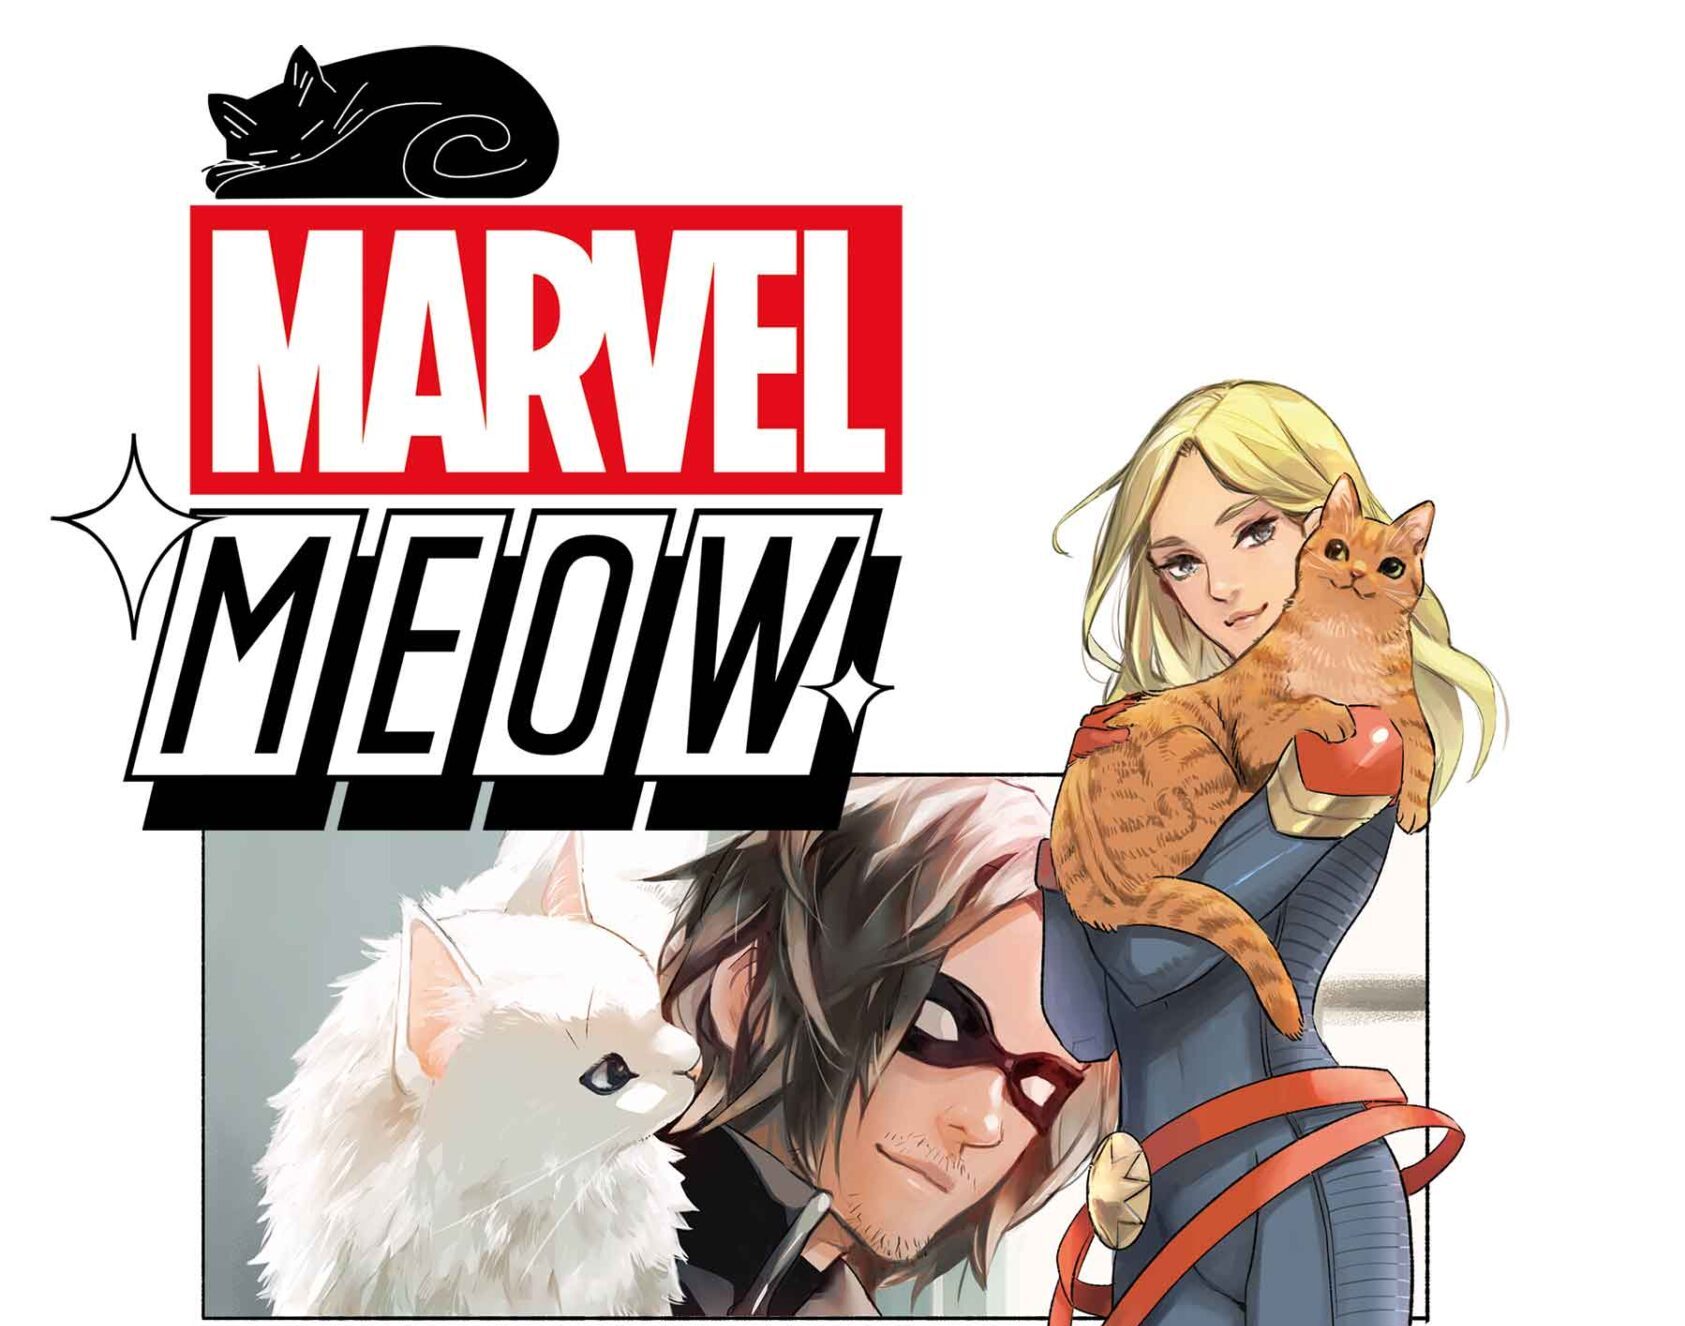 Feline Heroes Of The Marvel Universe Take Center Stage in Marvel Meow #1